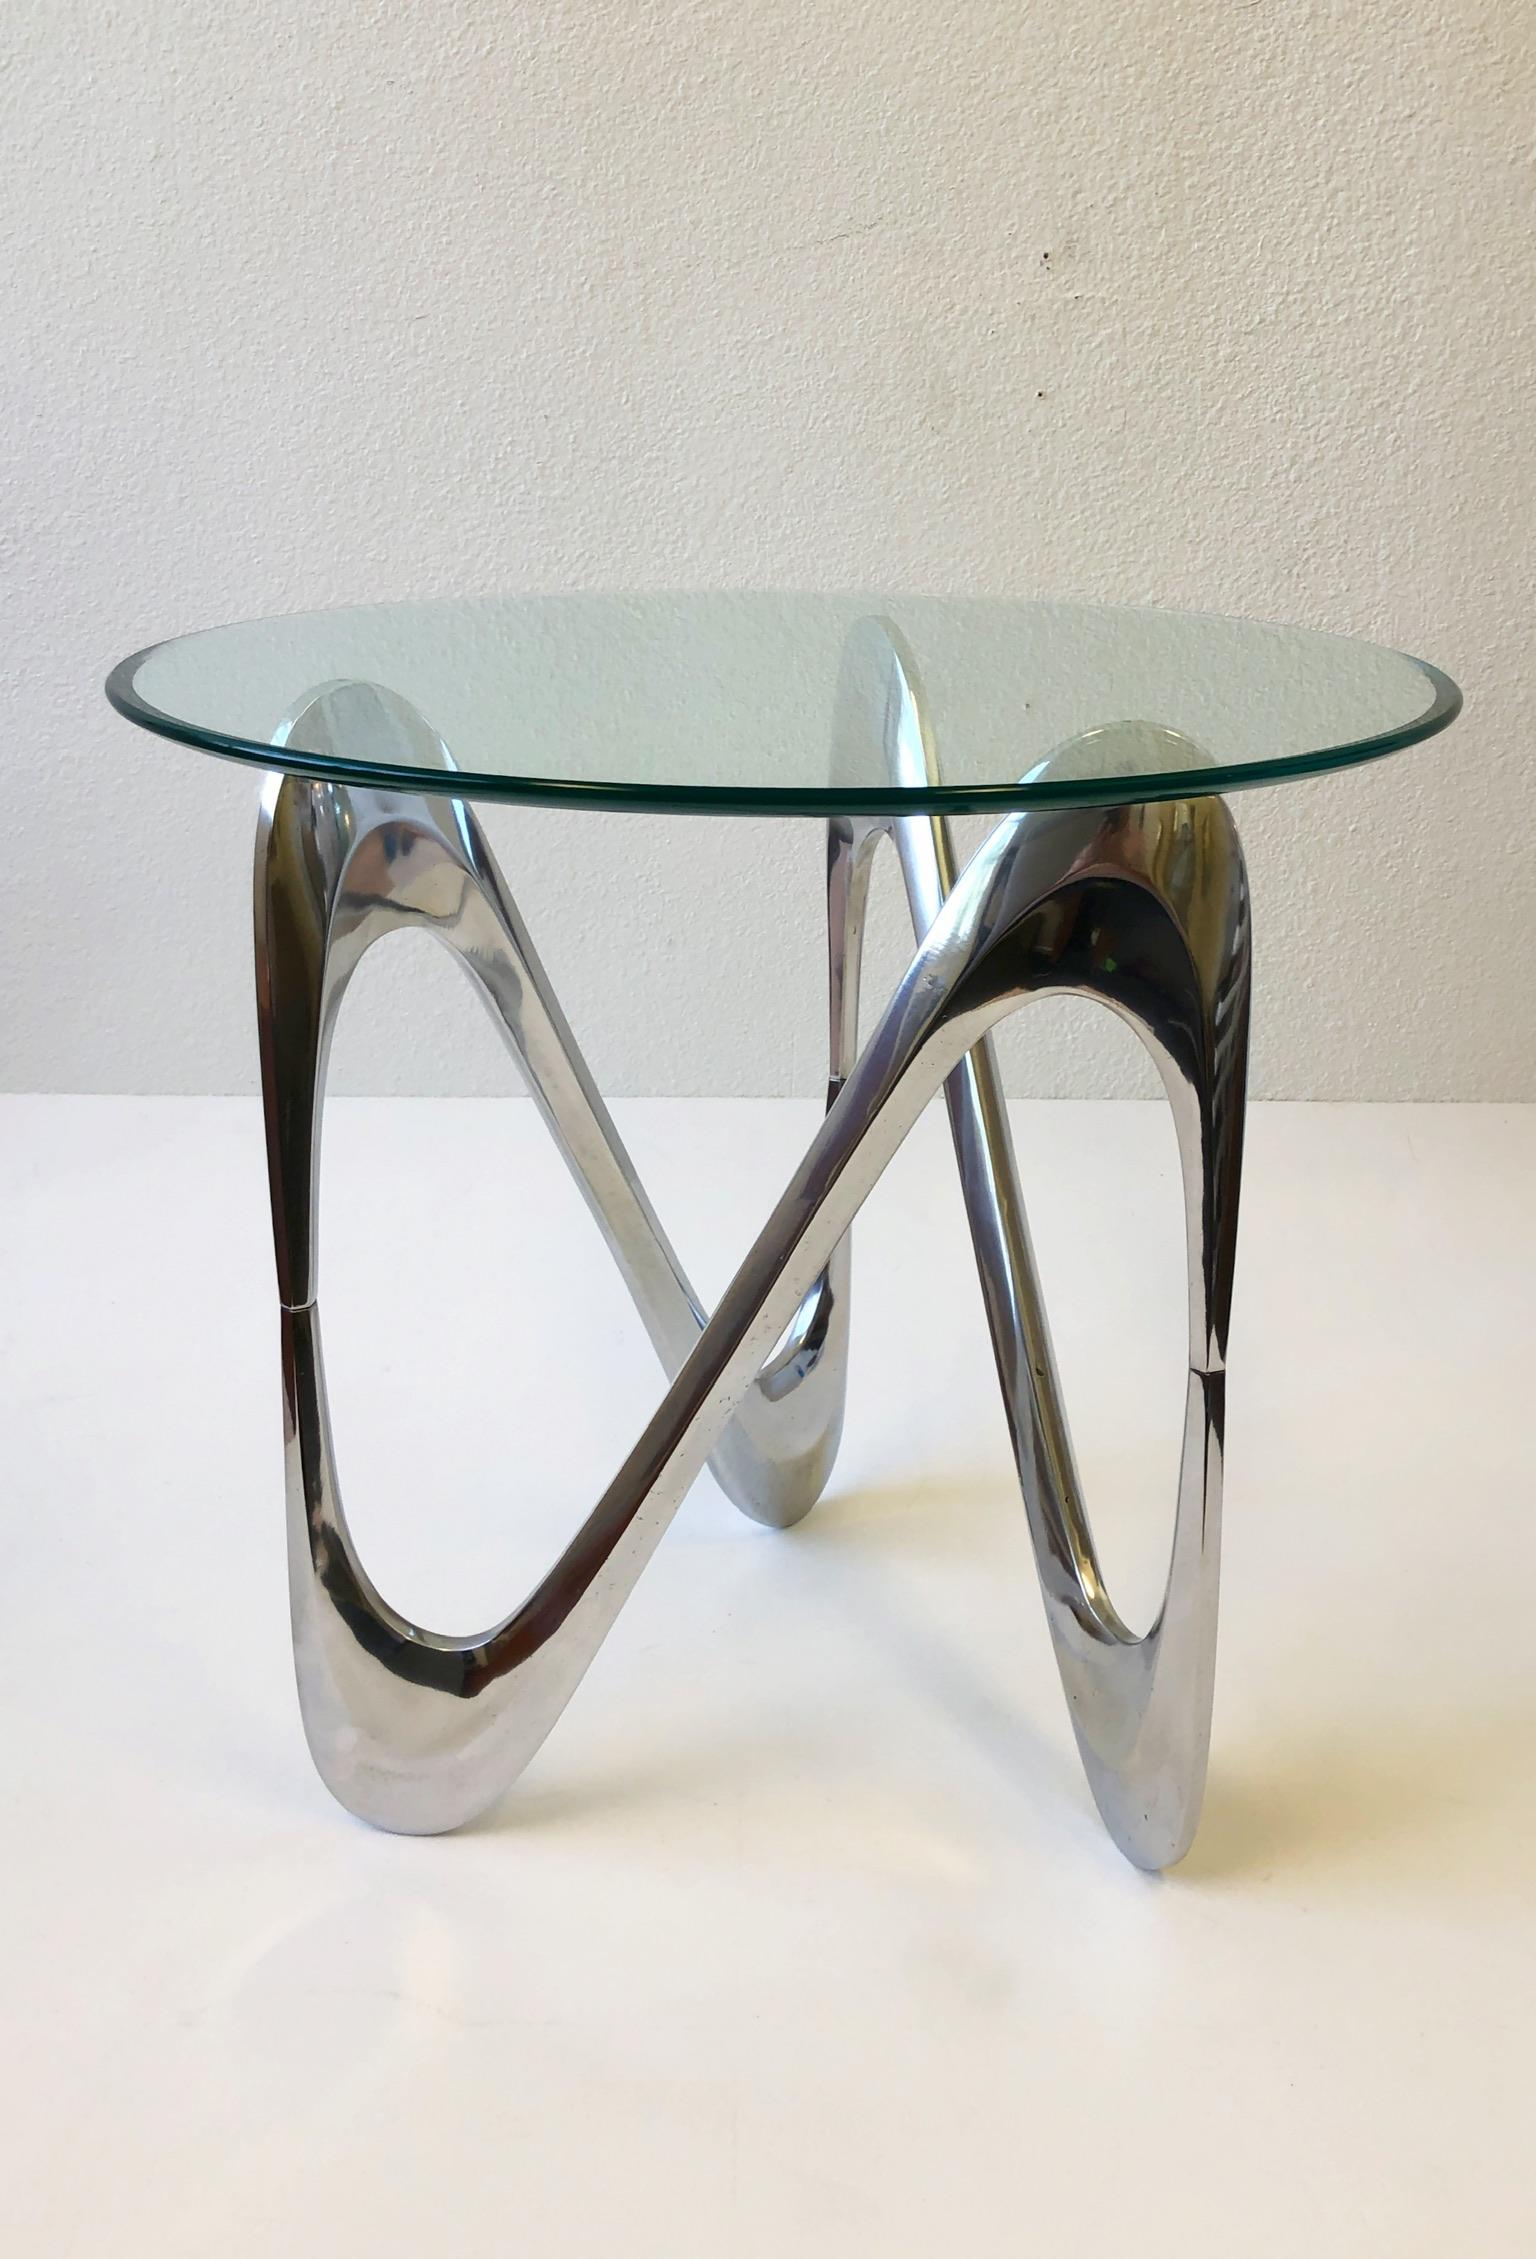 Late 20th Century Pair of Polish Aluminum Side Tables by Knut Hesterberg